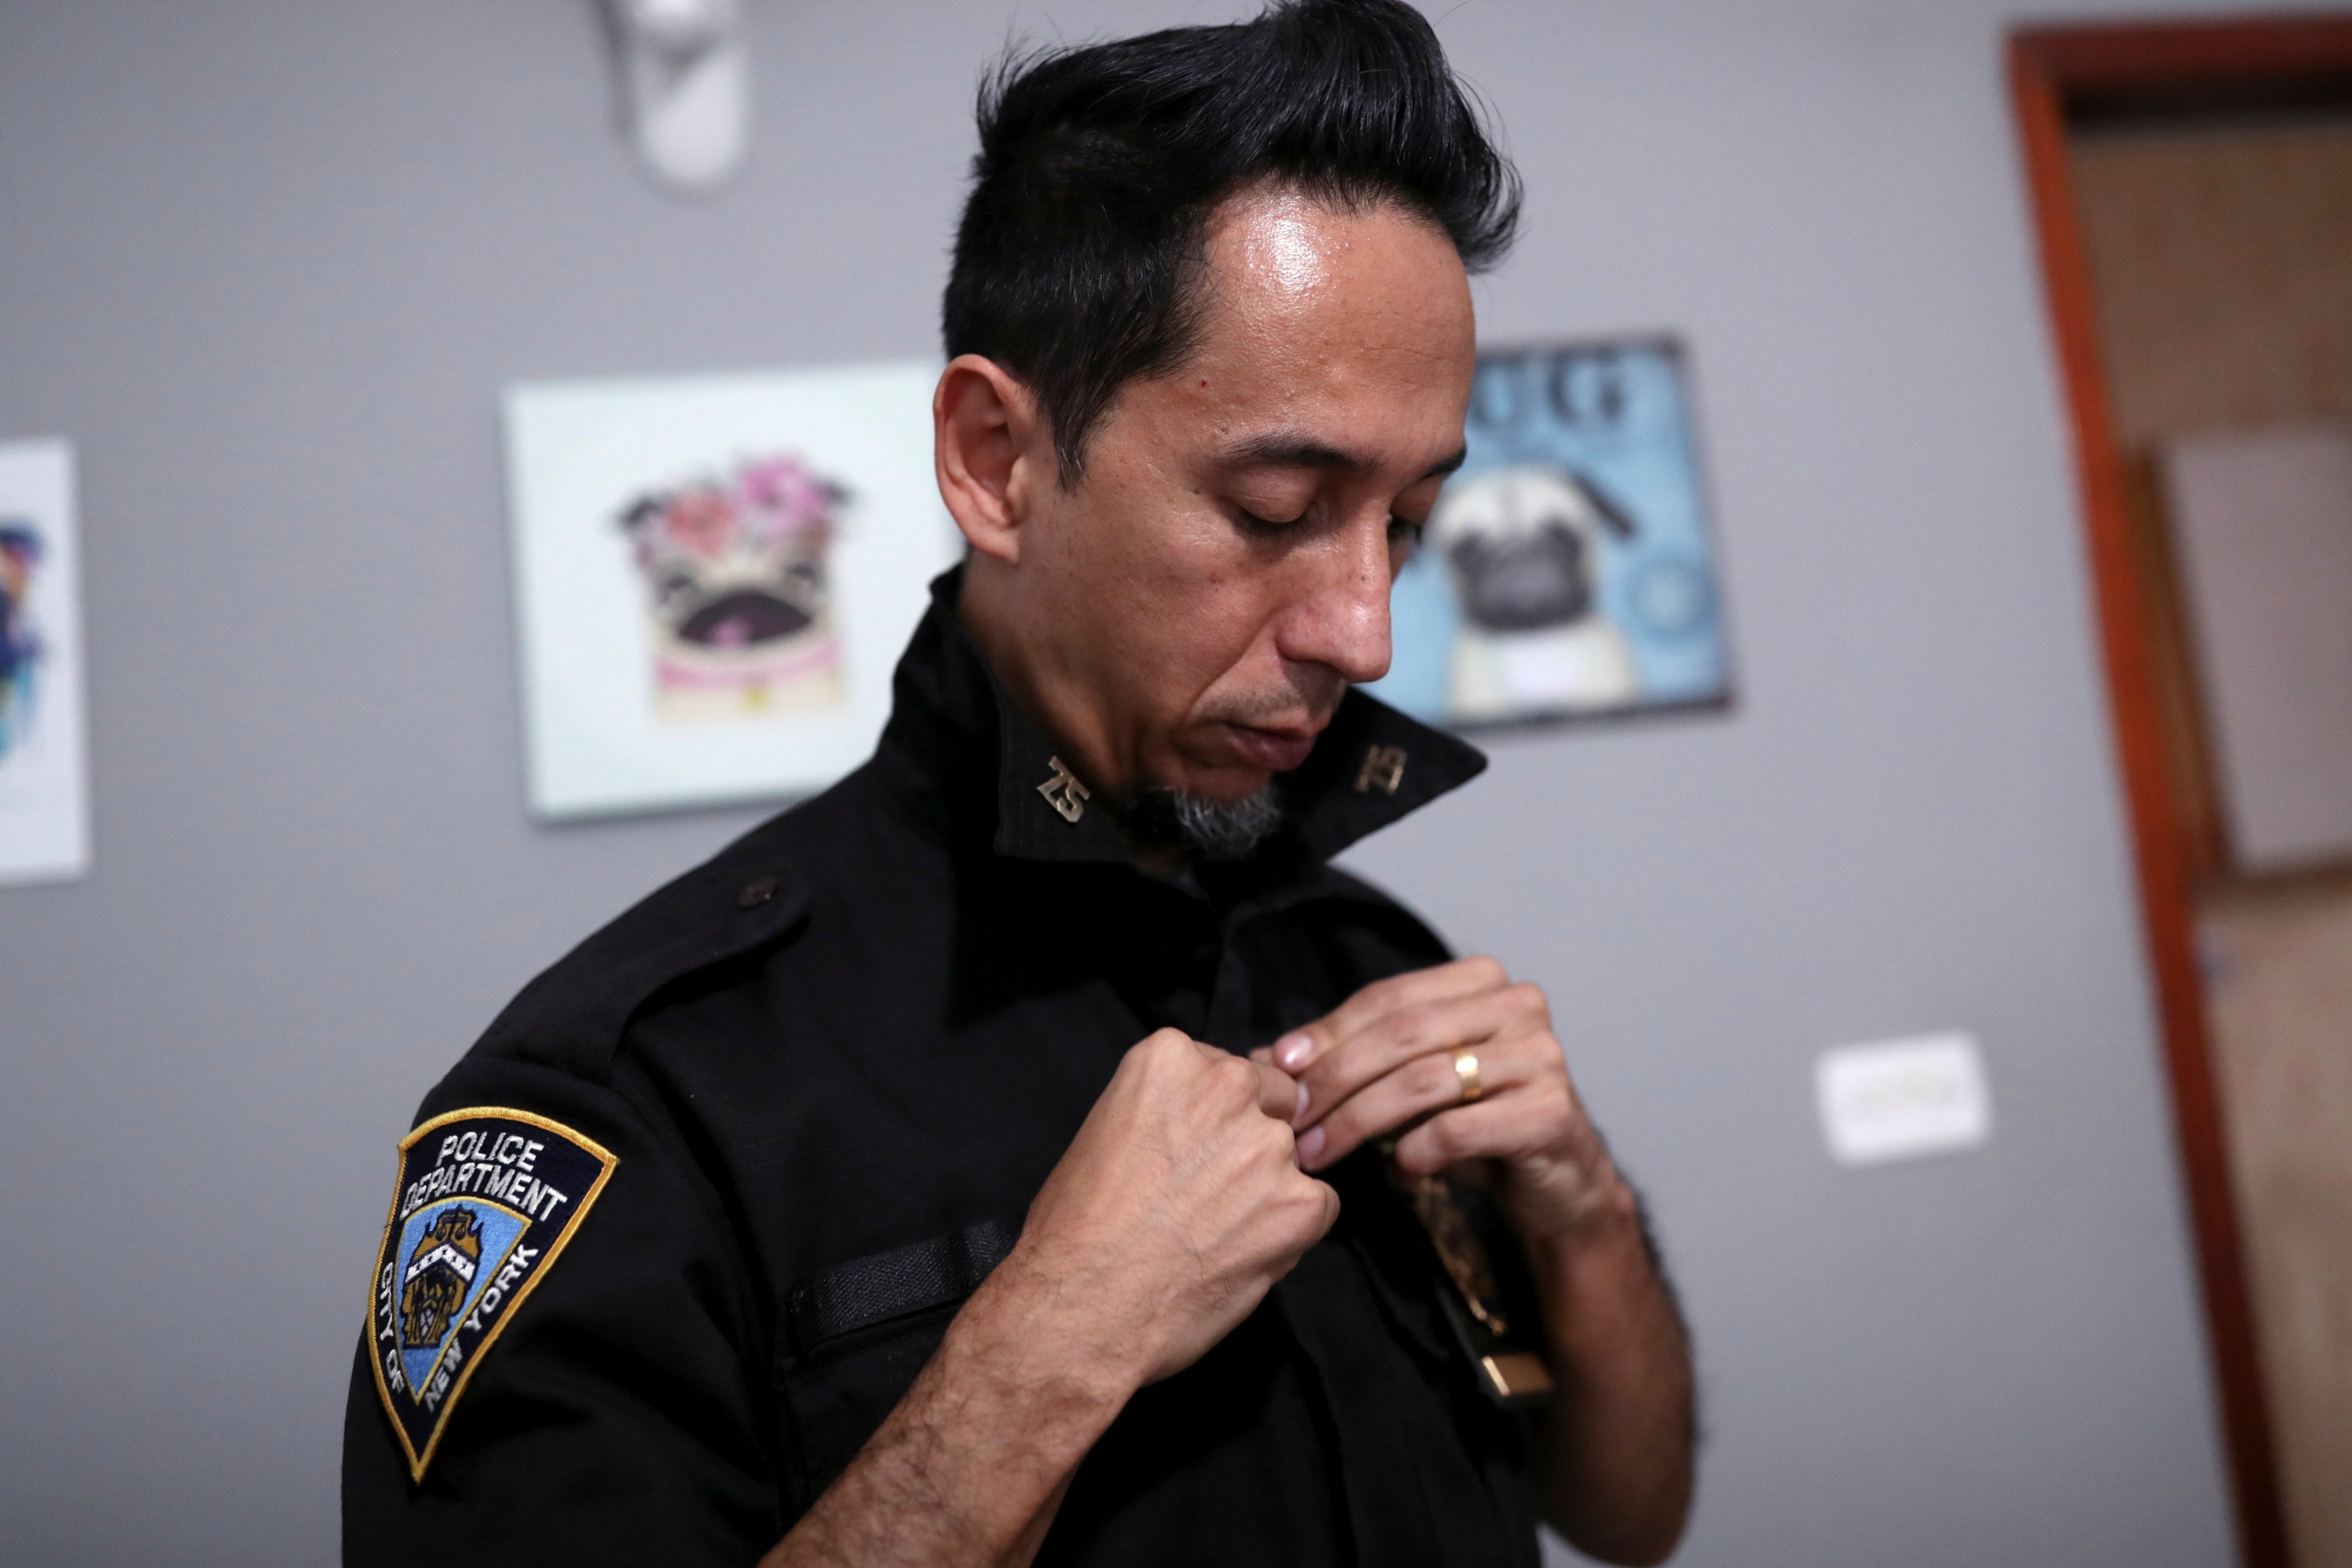 Eduardo Tai, a member of a group of Brazilian fans of the New York Police Department (NYPD) puts on his NYPD replica uniform in Sao Paulo, Brazil, May 22, 2021. (Reuters Photo)